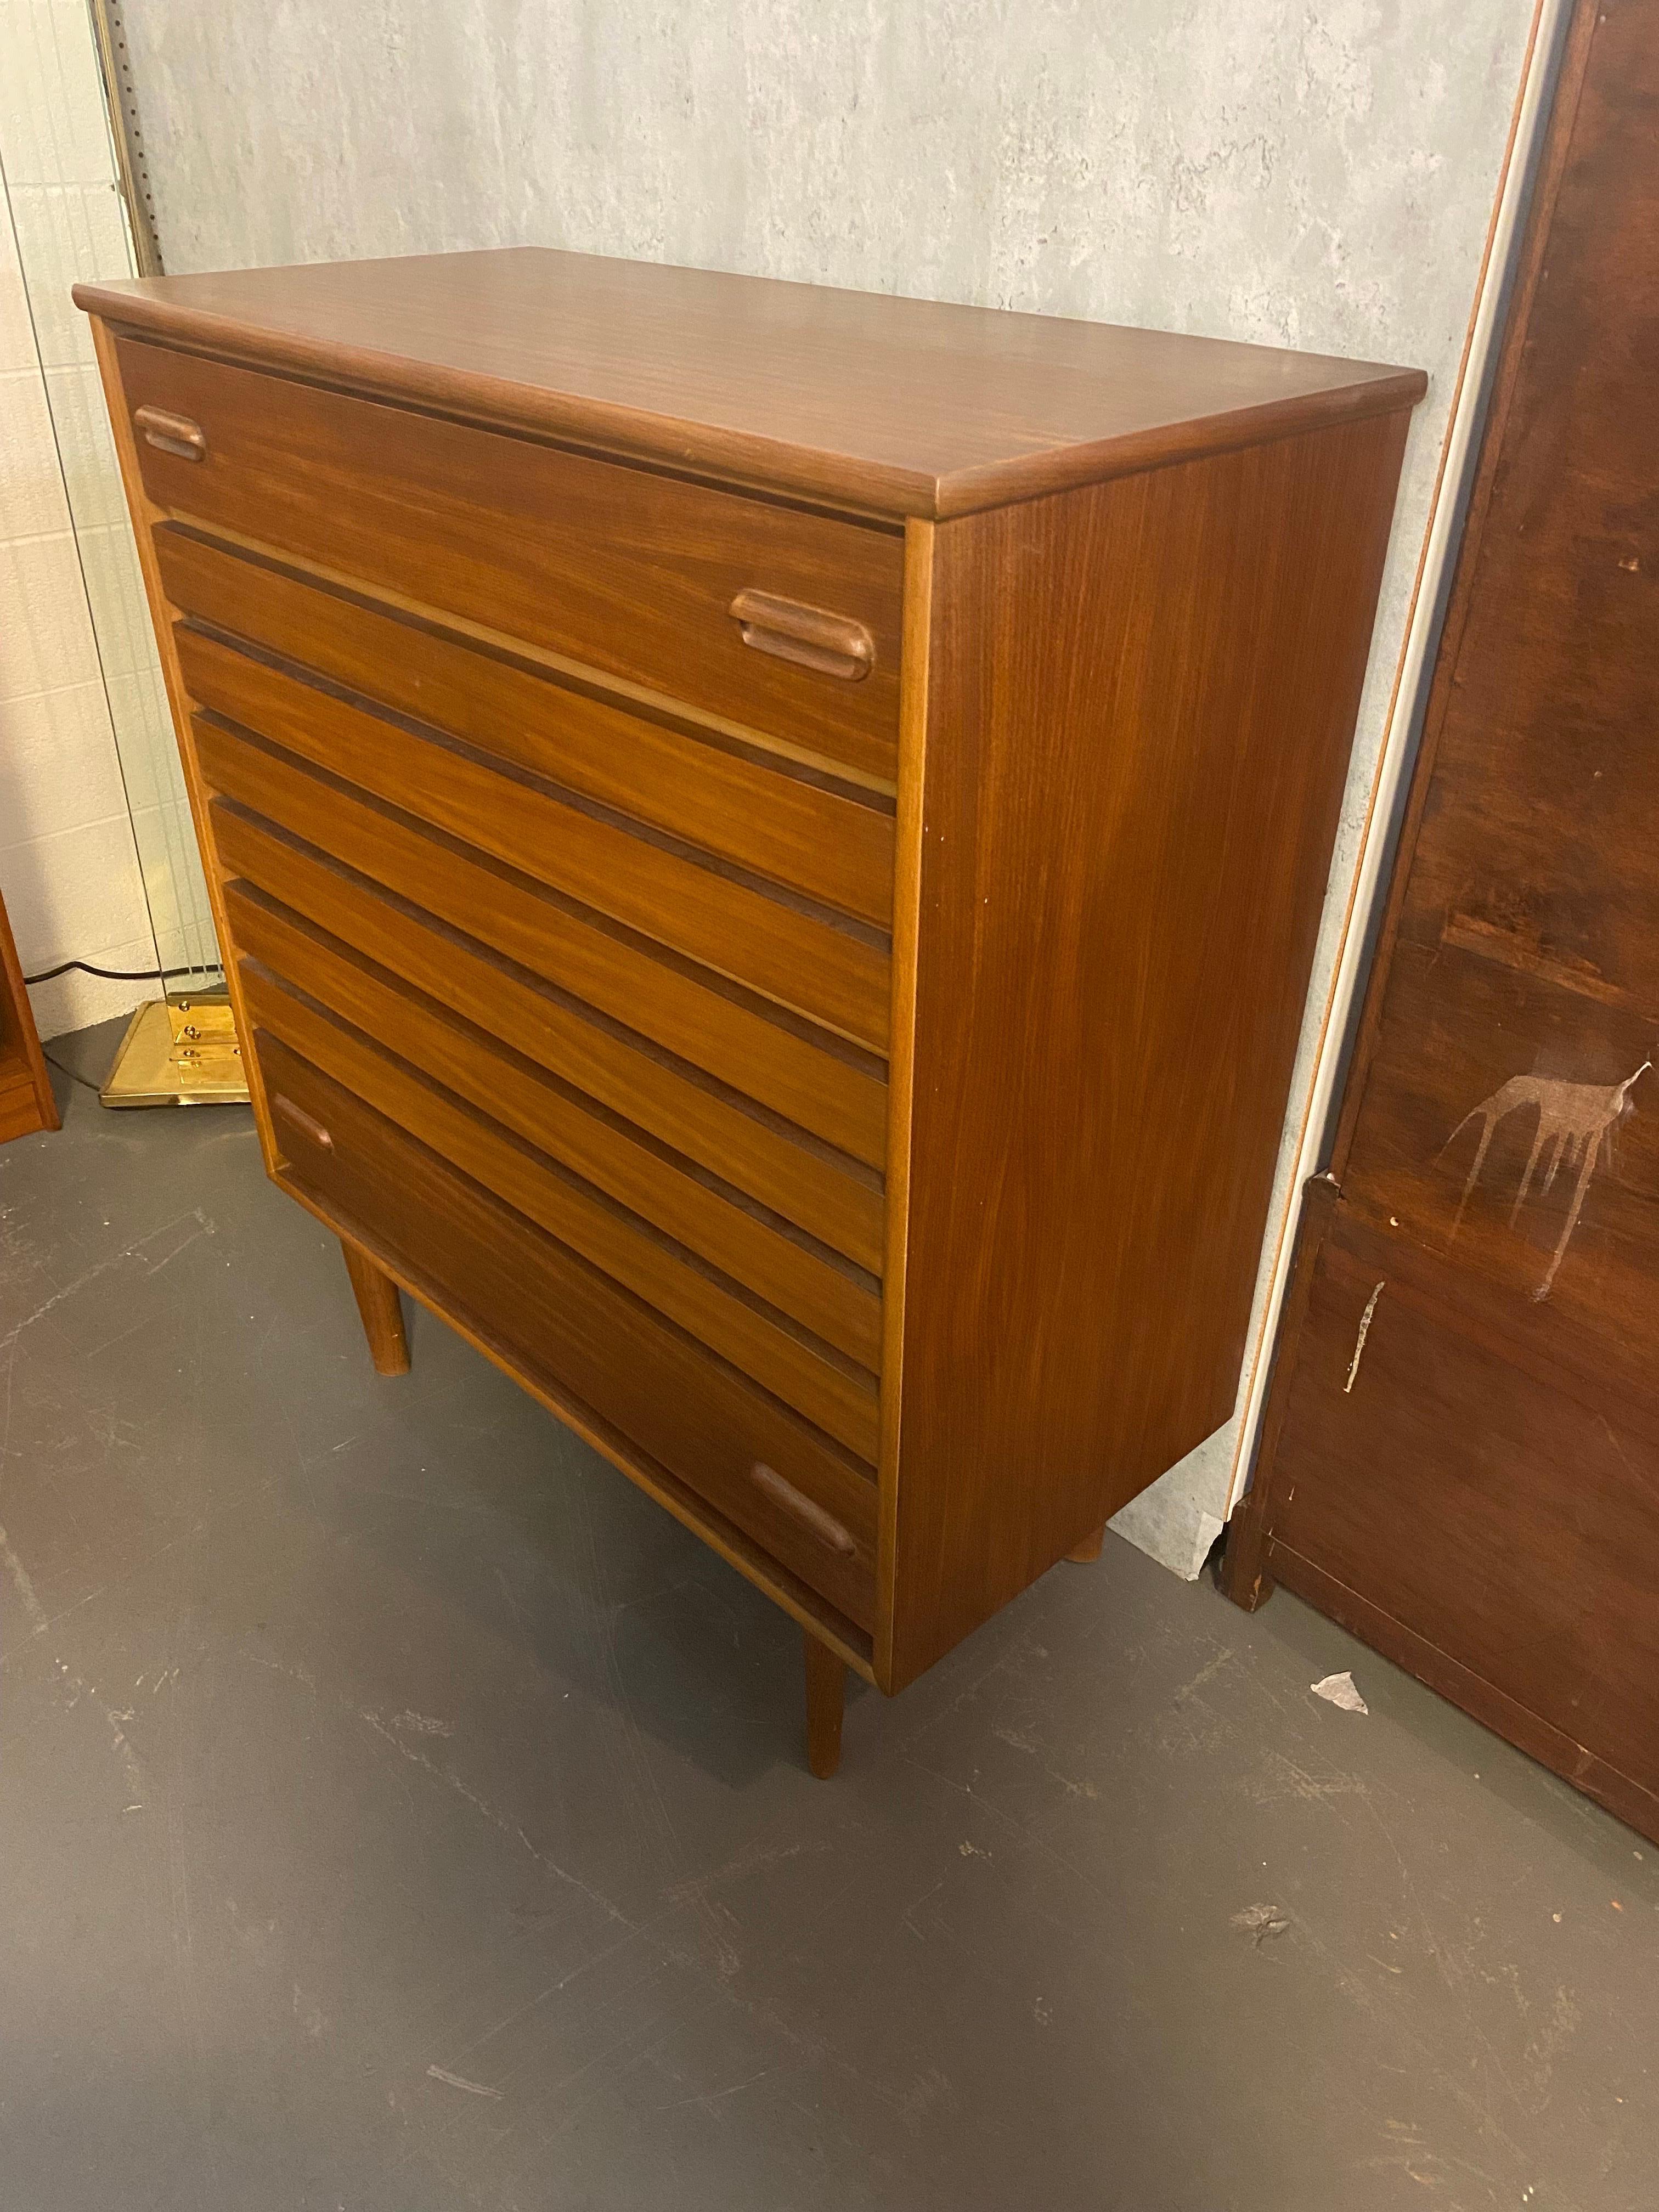 Gorgeous Mid-Century Modern highboy dresser. Marked inside the top drawer with 